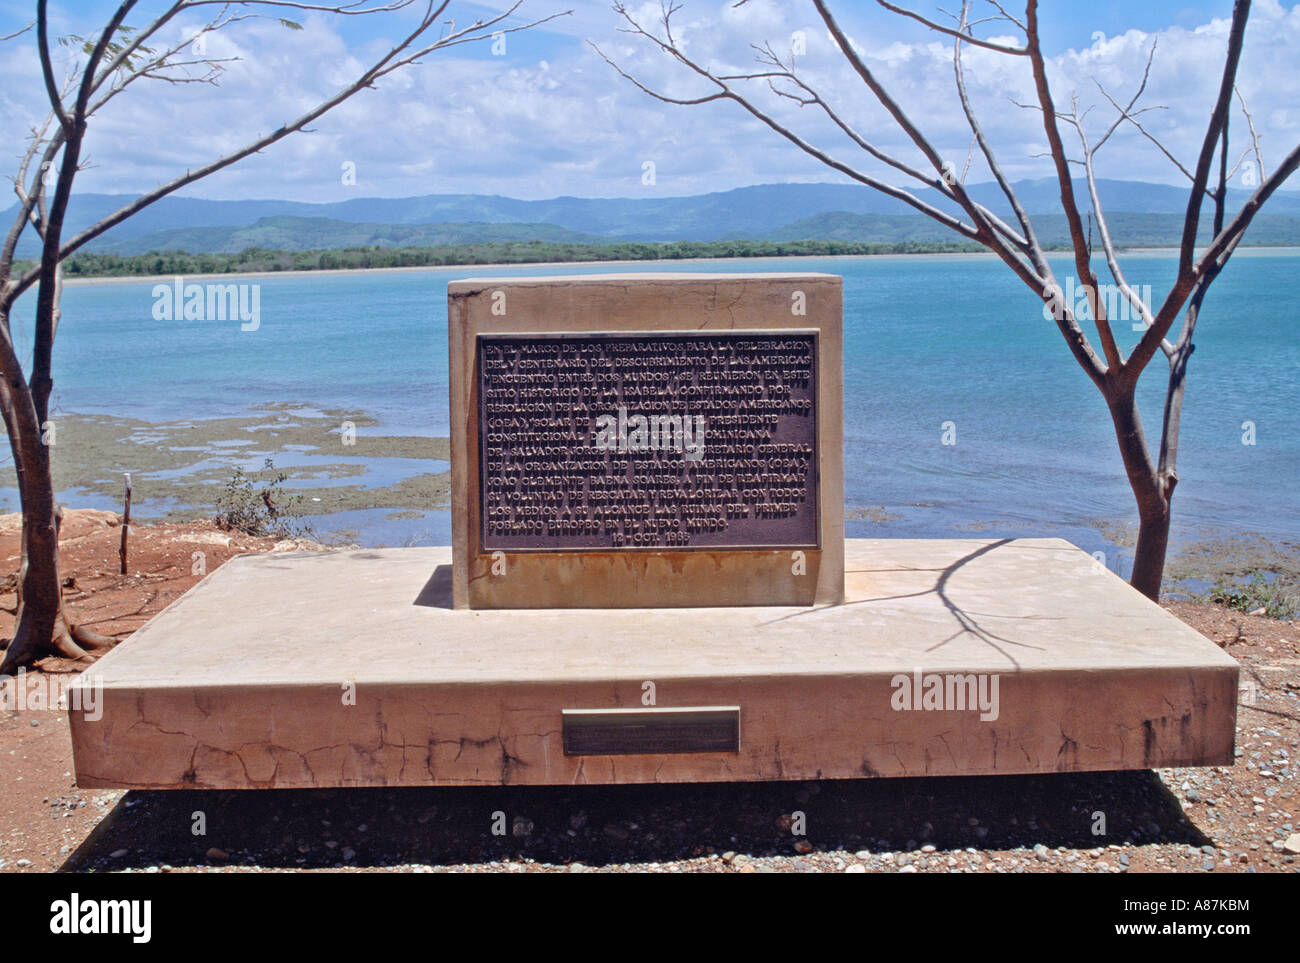 Marker at the archaeological site of La Isabella near the town of El Castillo Dominican Republic Stock Photo